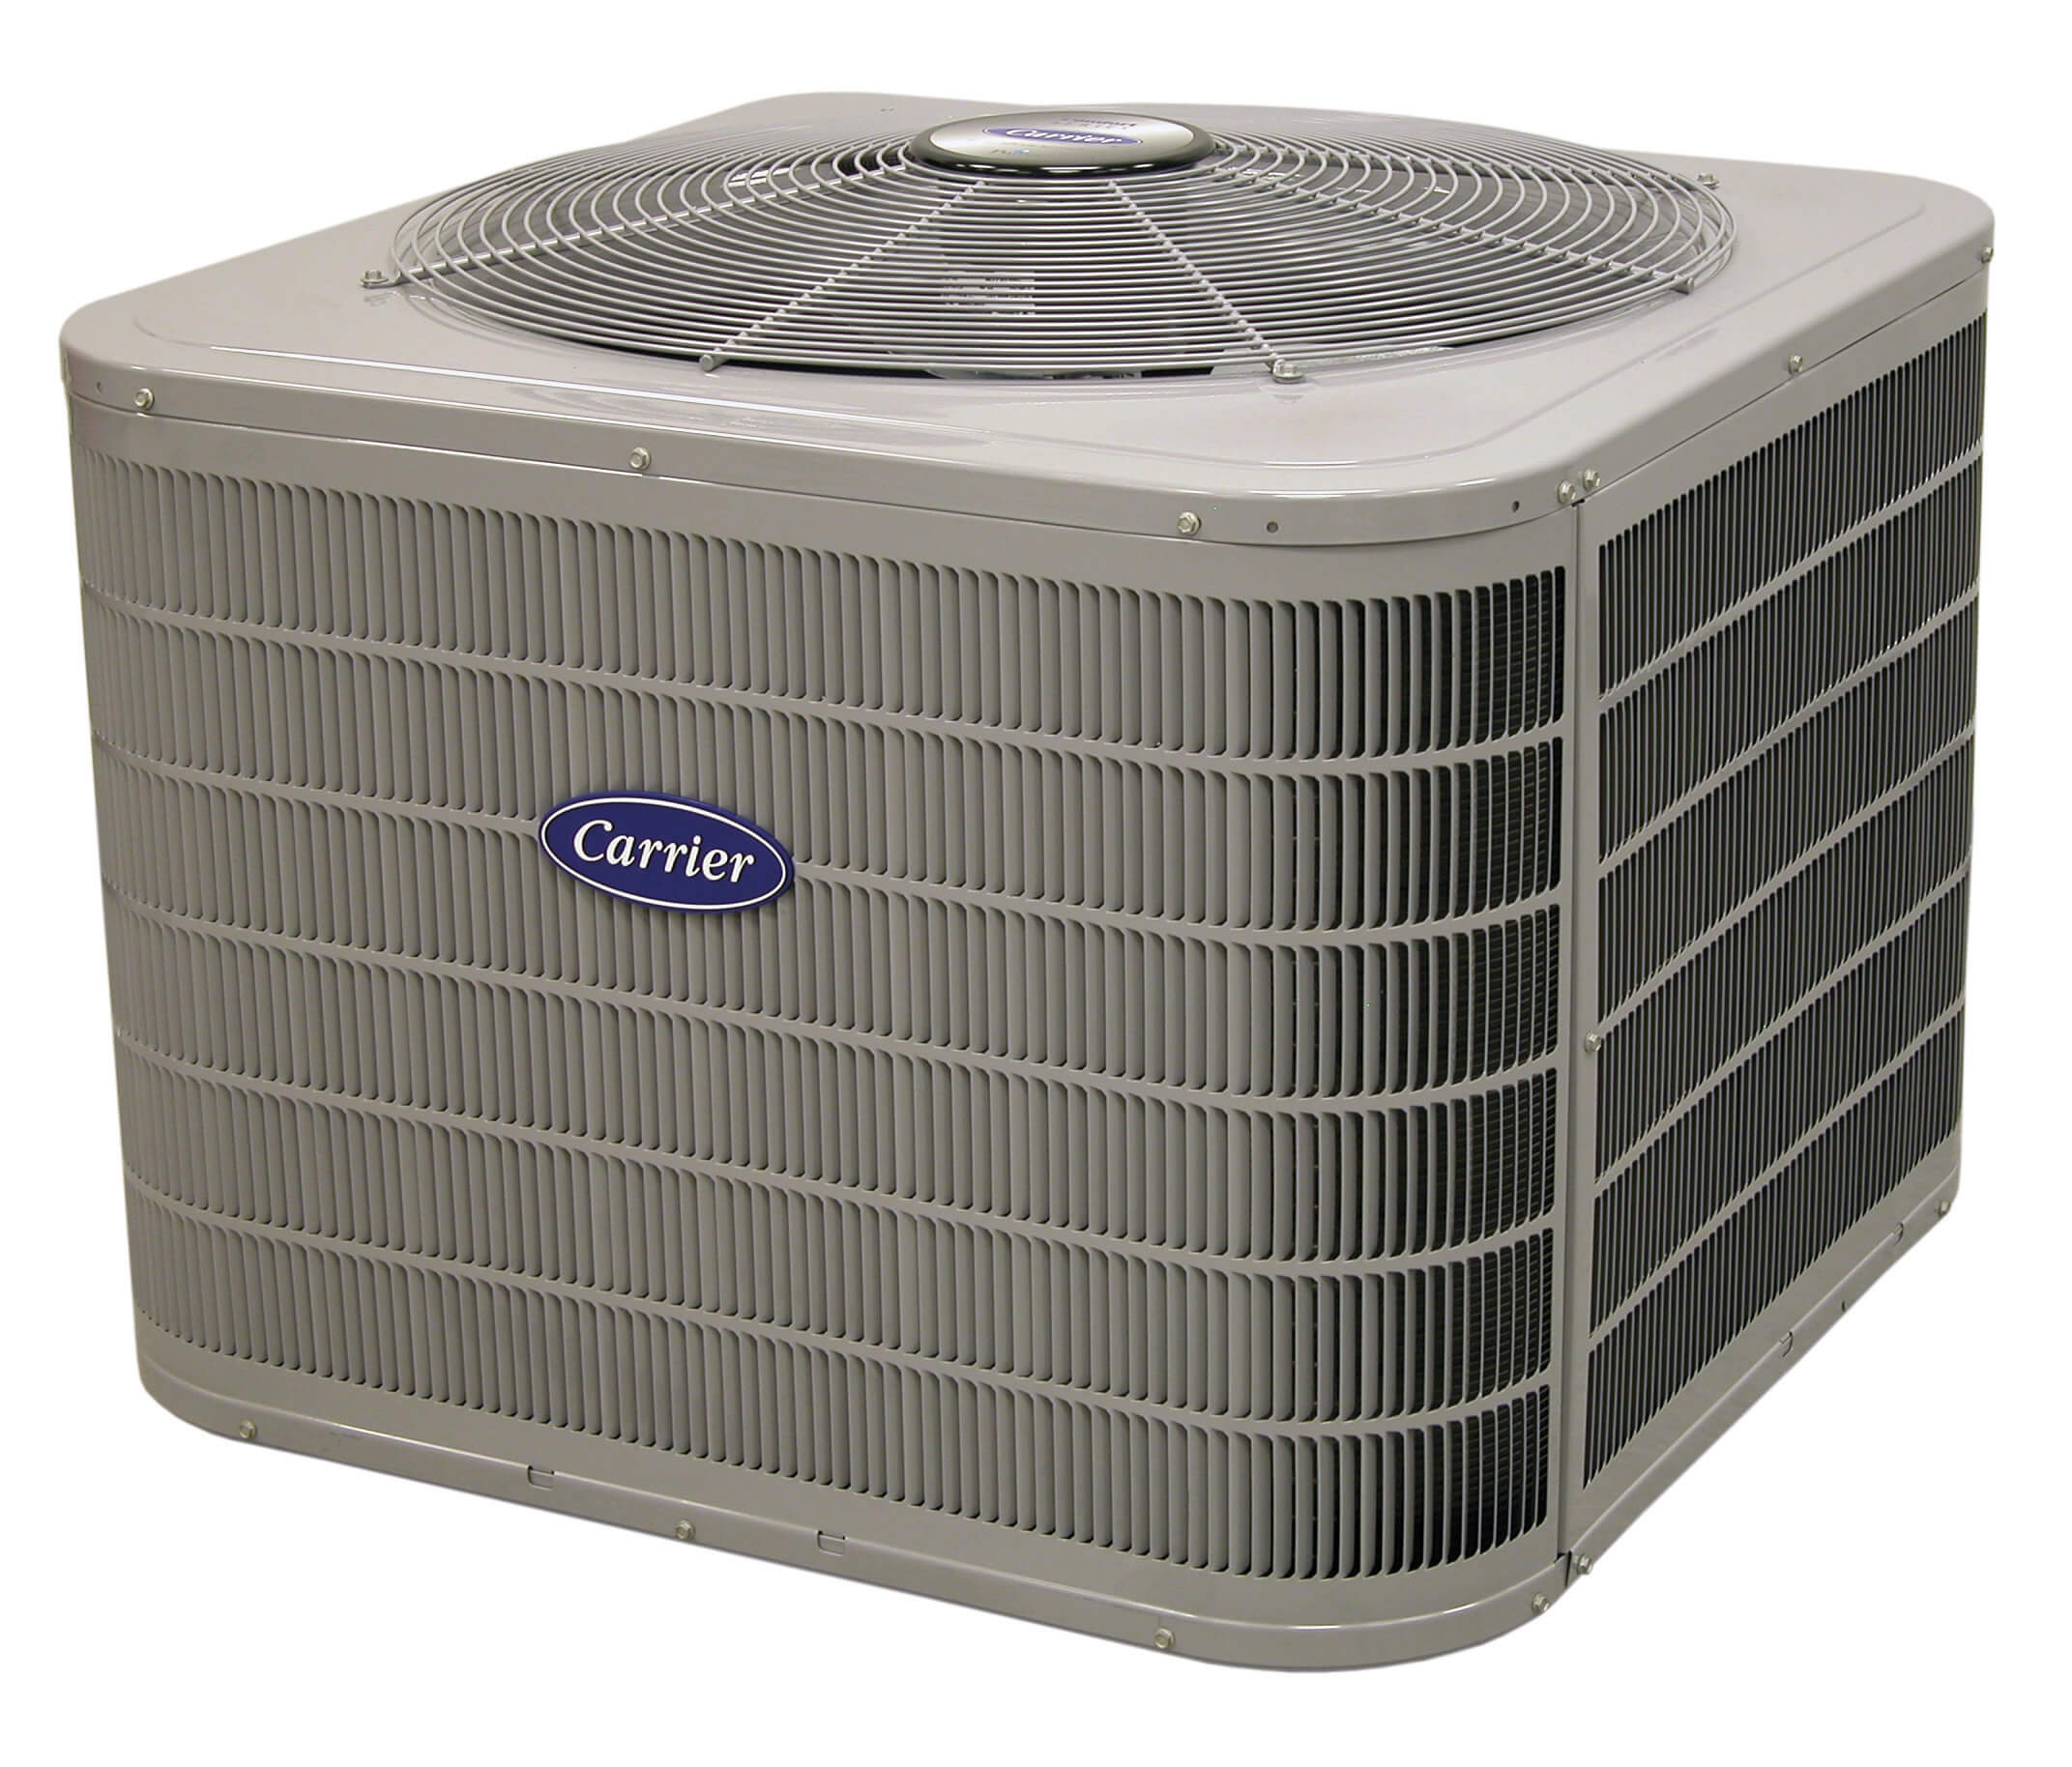 Carrier air conditioning system